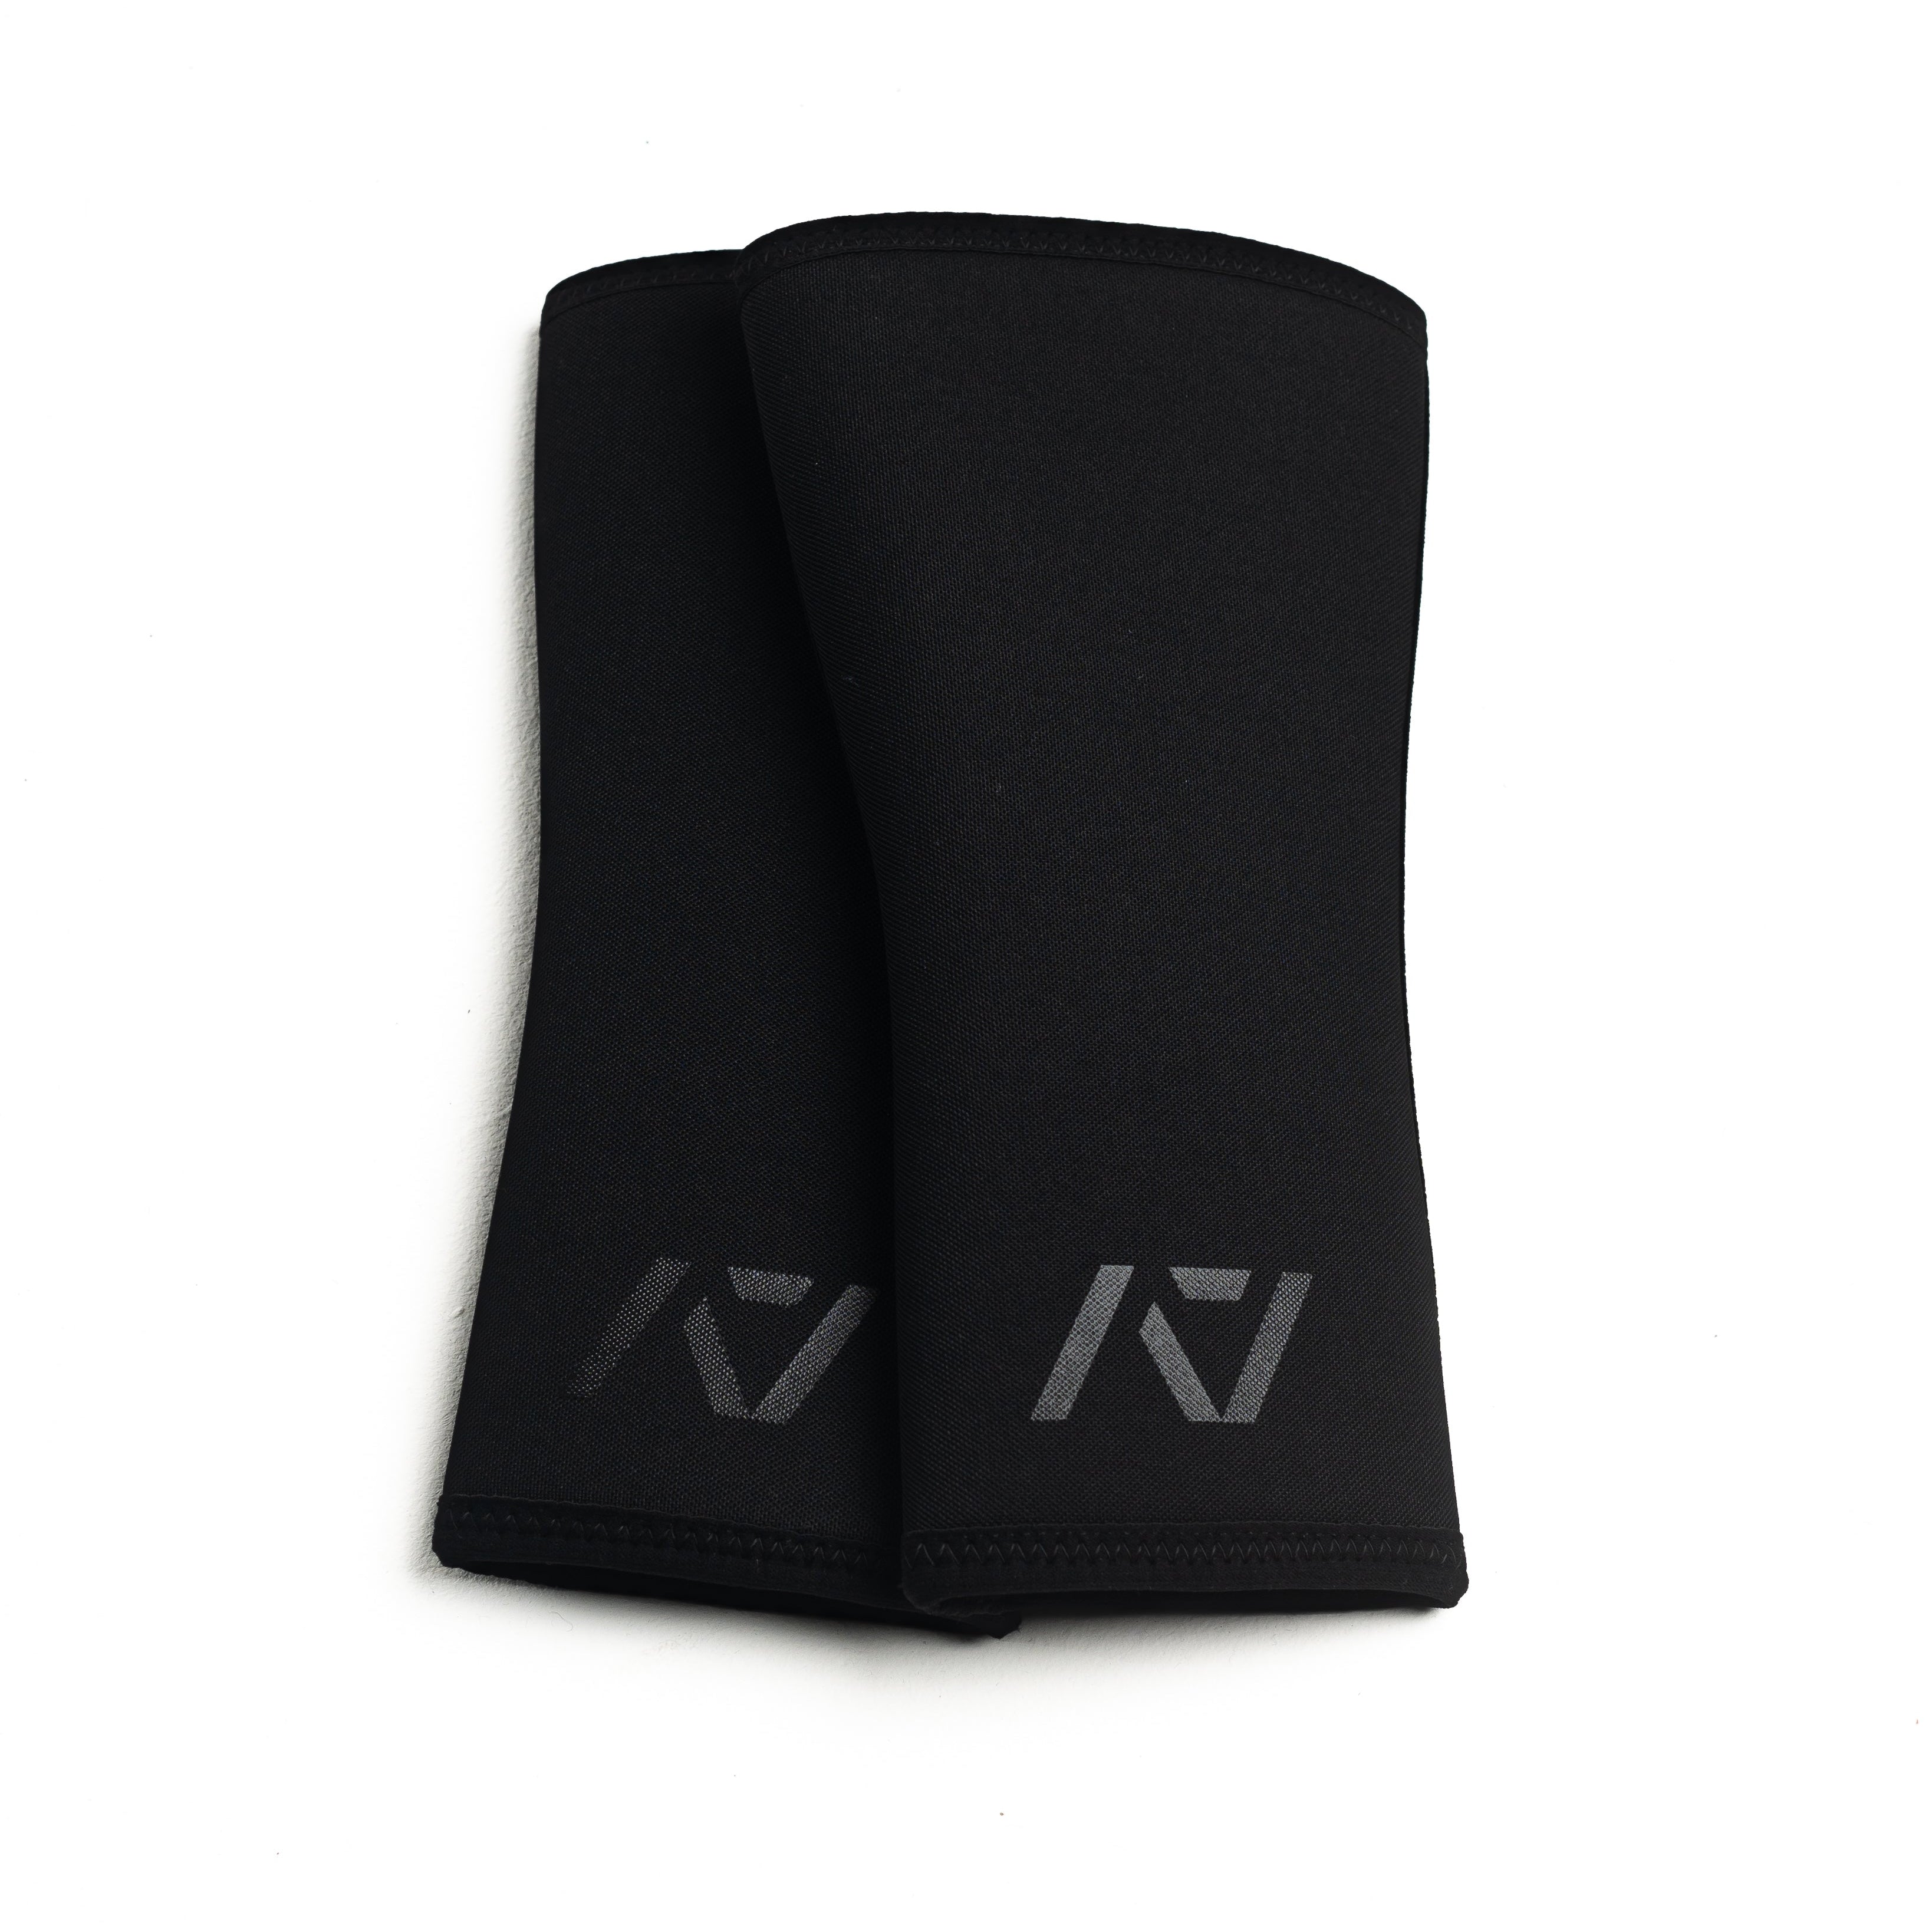 A7 IPF Approved Hourglass Knee Sleeves feature an hourglass-shaped centre taper fit to help provide knee compression while maintaining proper tightness around the calf and quad, offered in three stiffnesses (Flexi, Stiff and Rigor Mortis). Shop the full A7 Powerlifting IPF Approved Equipment collection. The IPF Approved Kit includes Powerlifting Singlet, A7 Meet Shirt, A7 Zebra Wrist Wraps and A7 Deadlift Socks. All A7 Powerlifting Equipment shipping to UK, Norway, Switzerland and Iceland.